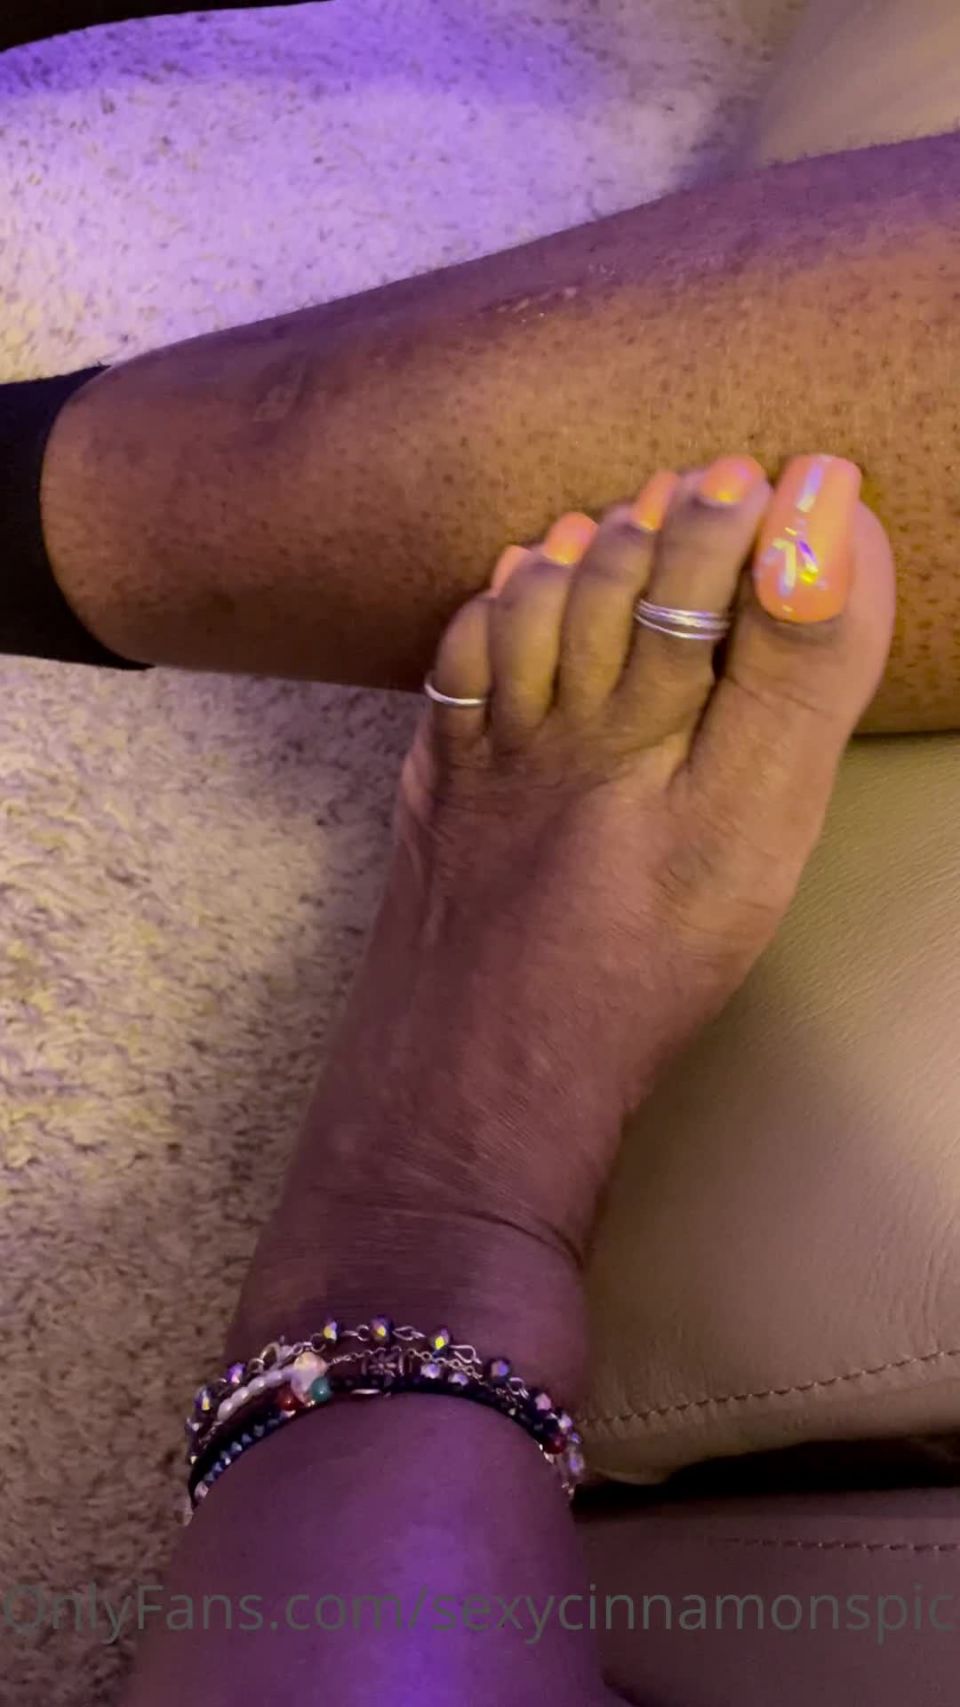 Sexycinnamonspice () - the power of these feet and nails 11-08-2021